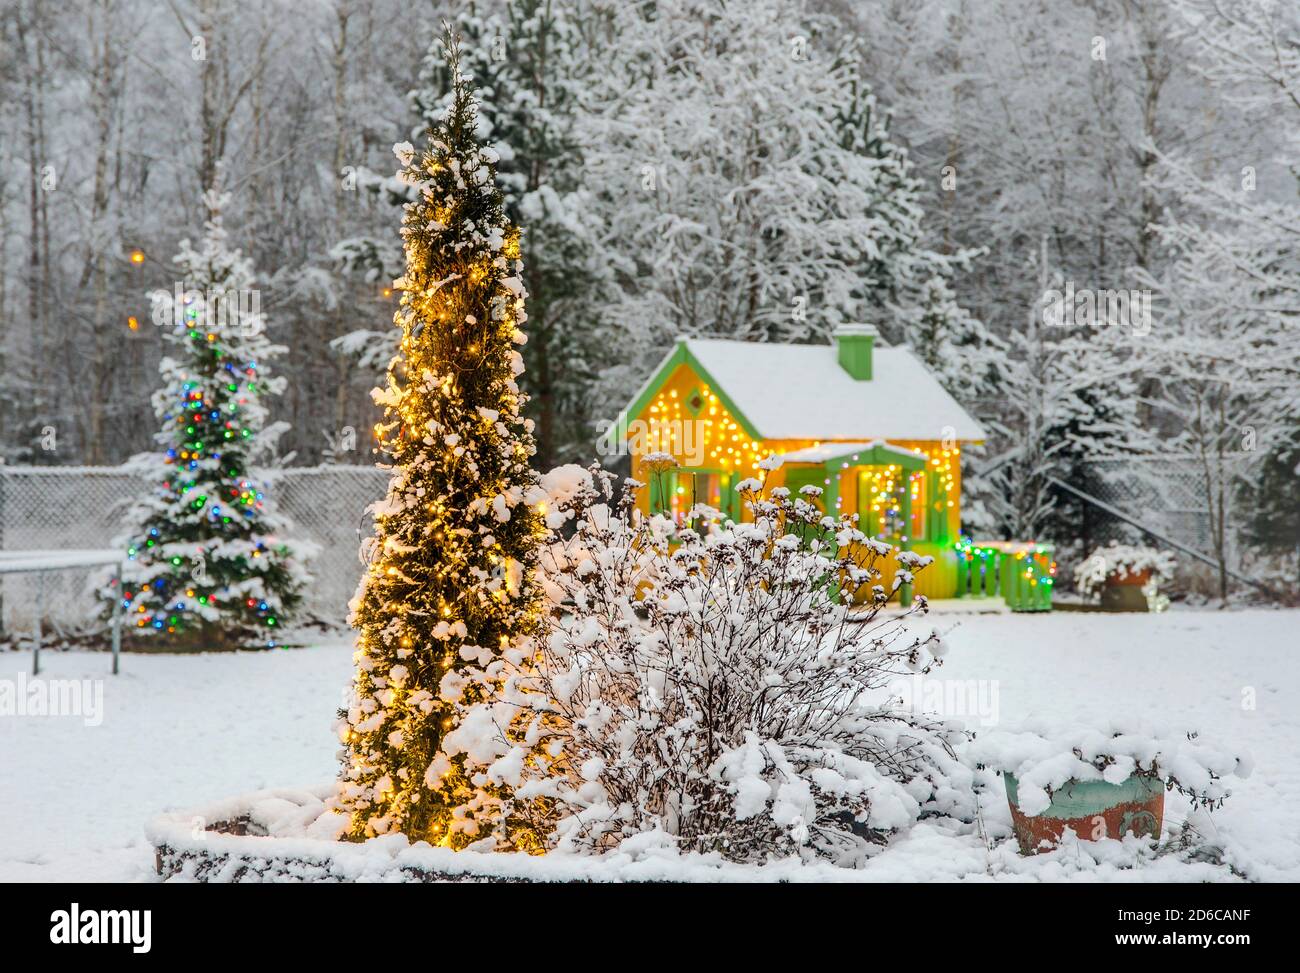 Christmas decoration lights illuminated in home garden in winter outdoors. Led lights on evergreen domestic Thuja occidentalis tree in flower bed. Stock Photo